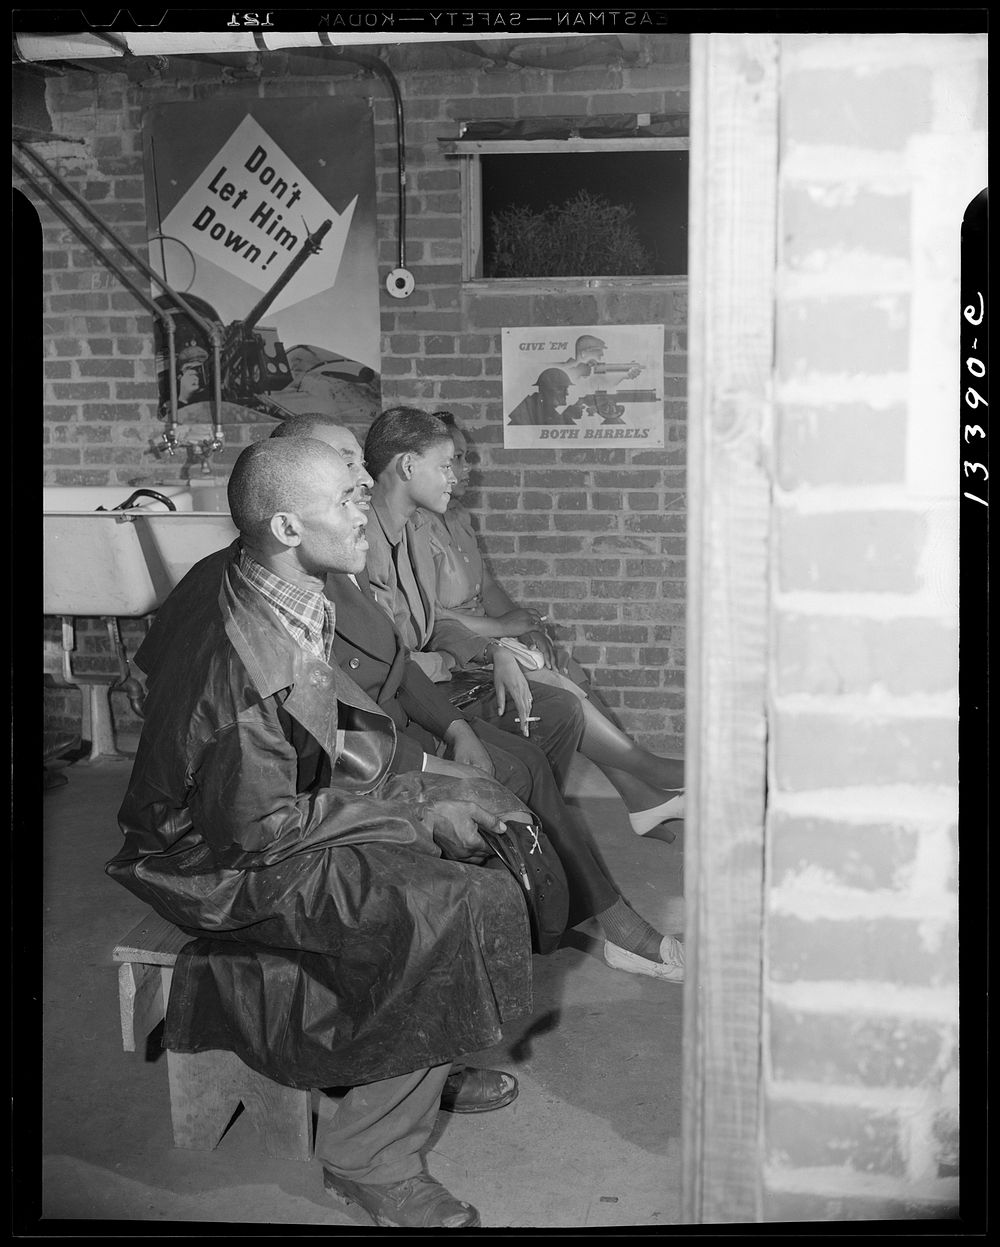 Washington, D.C. Air raid wardens' meeting in zone nine, Southwest area. Air raid wardens attending a meeting. Sourced from…